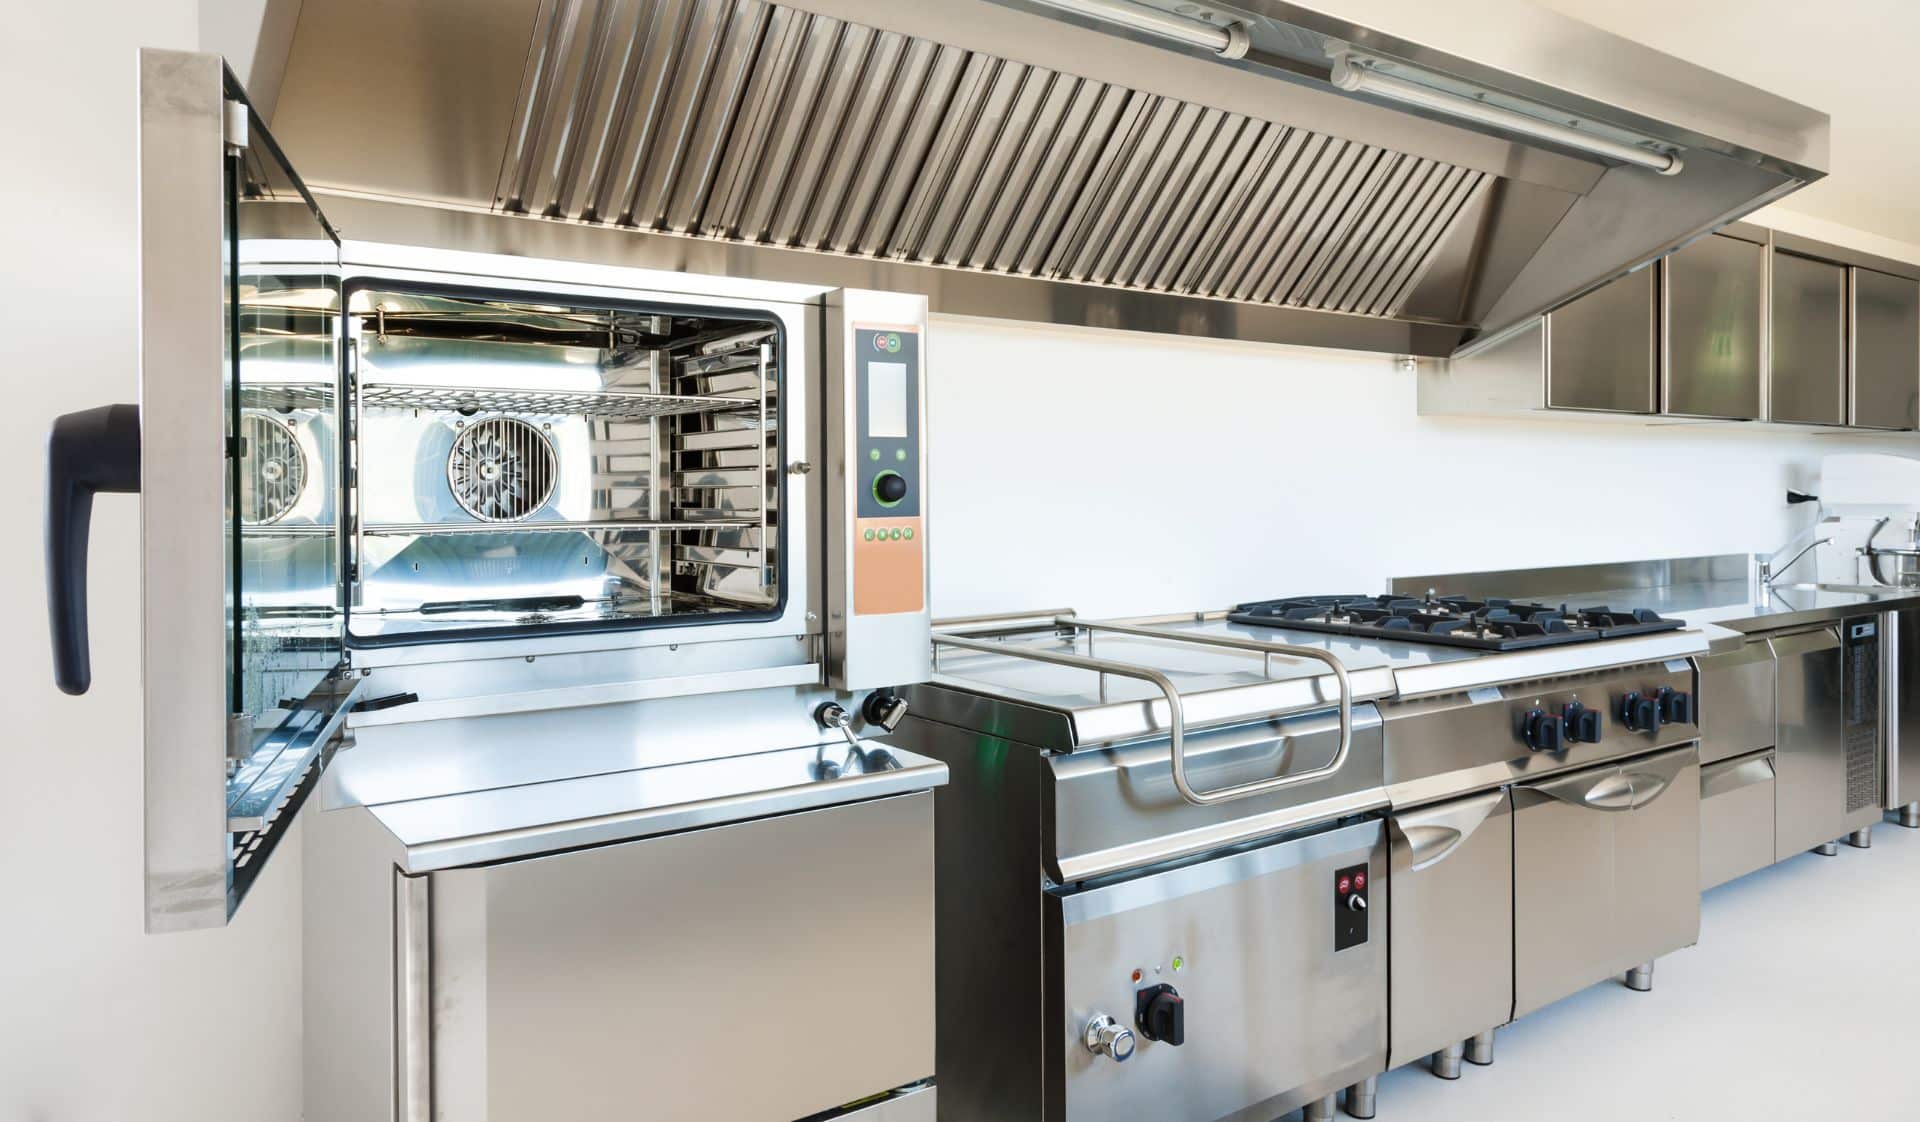 What’s the Difference? Comparing Types of Ovens